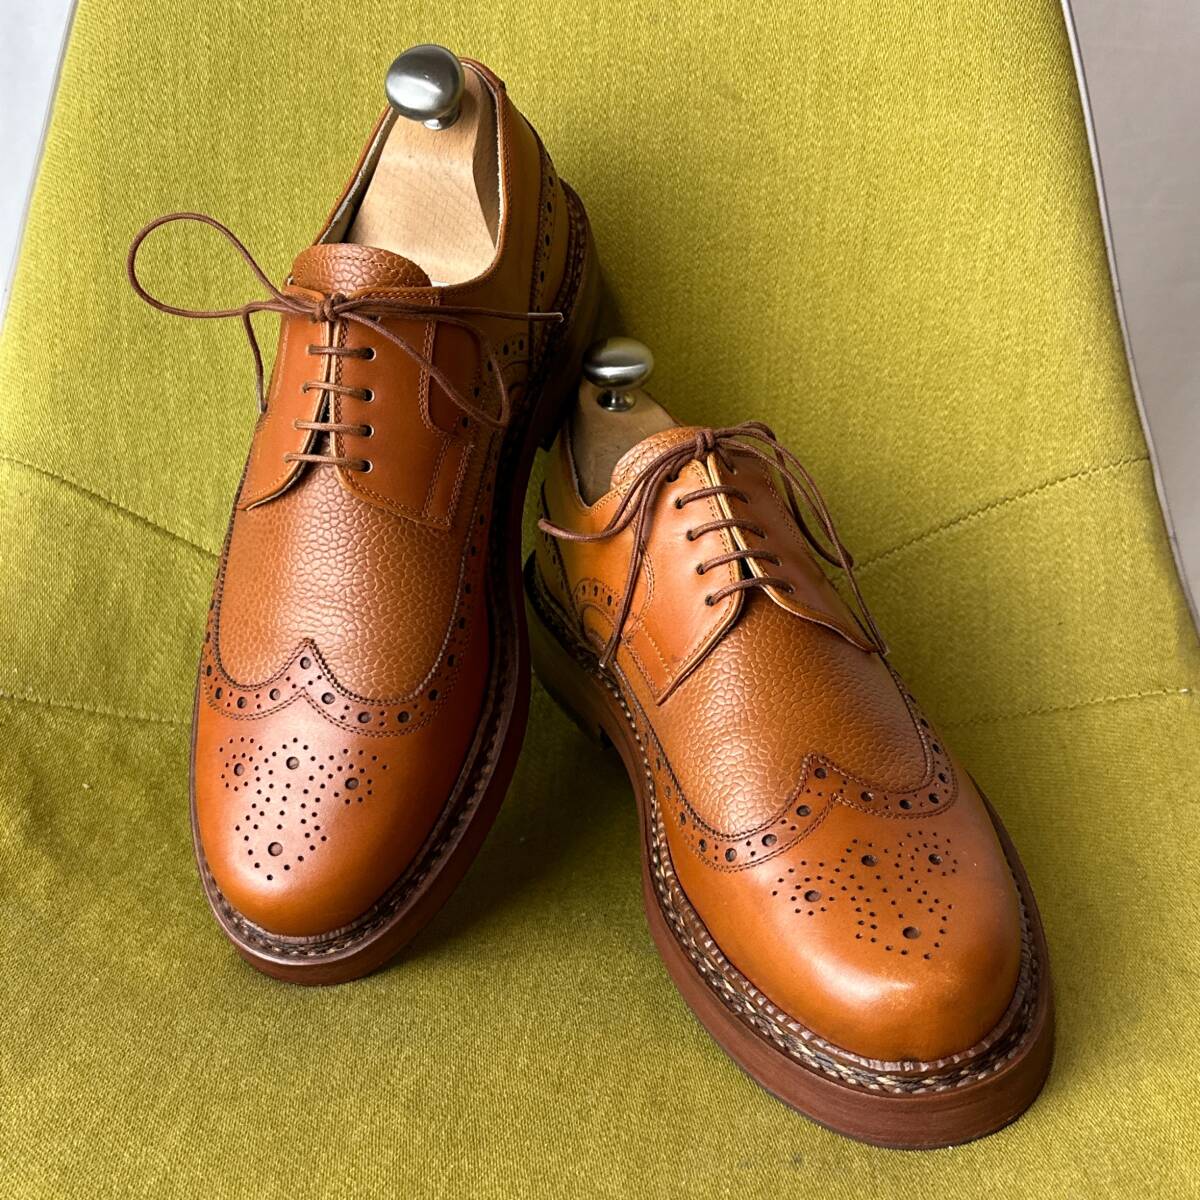  beautiful goods Buday shoesb large shoes tsopna-to made law Wing chip combination leather shoes 7 Hungary made 25.5 corresponding Triple sole 